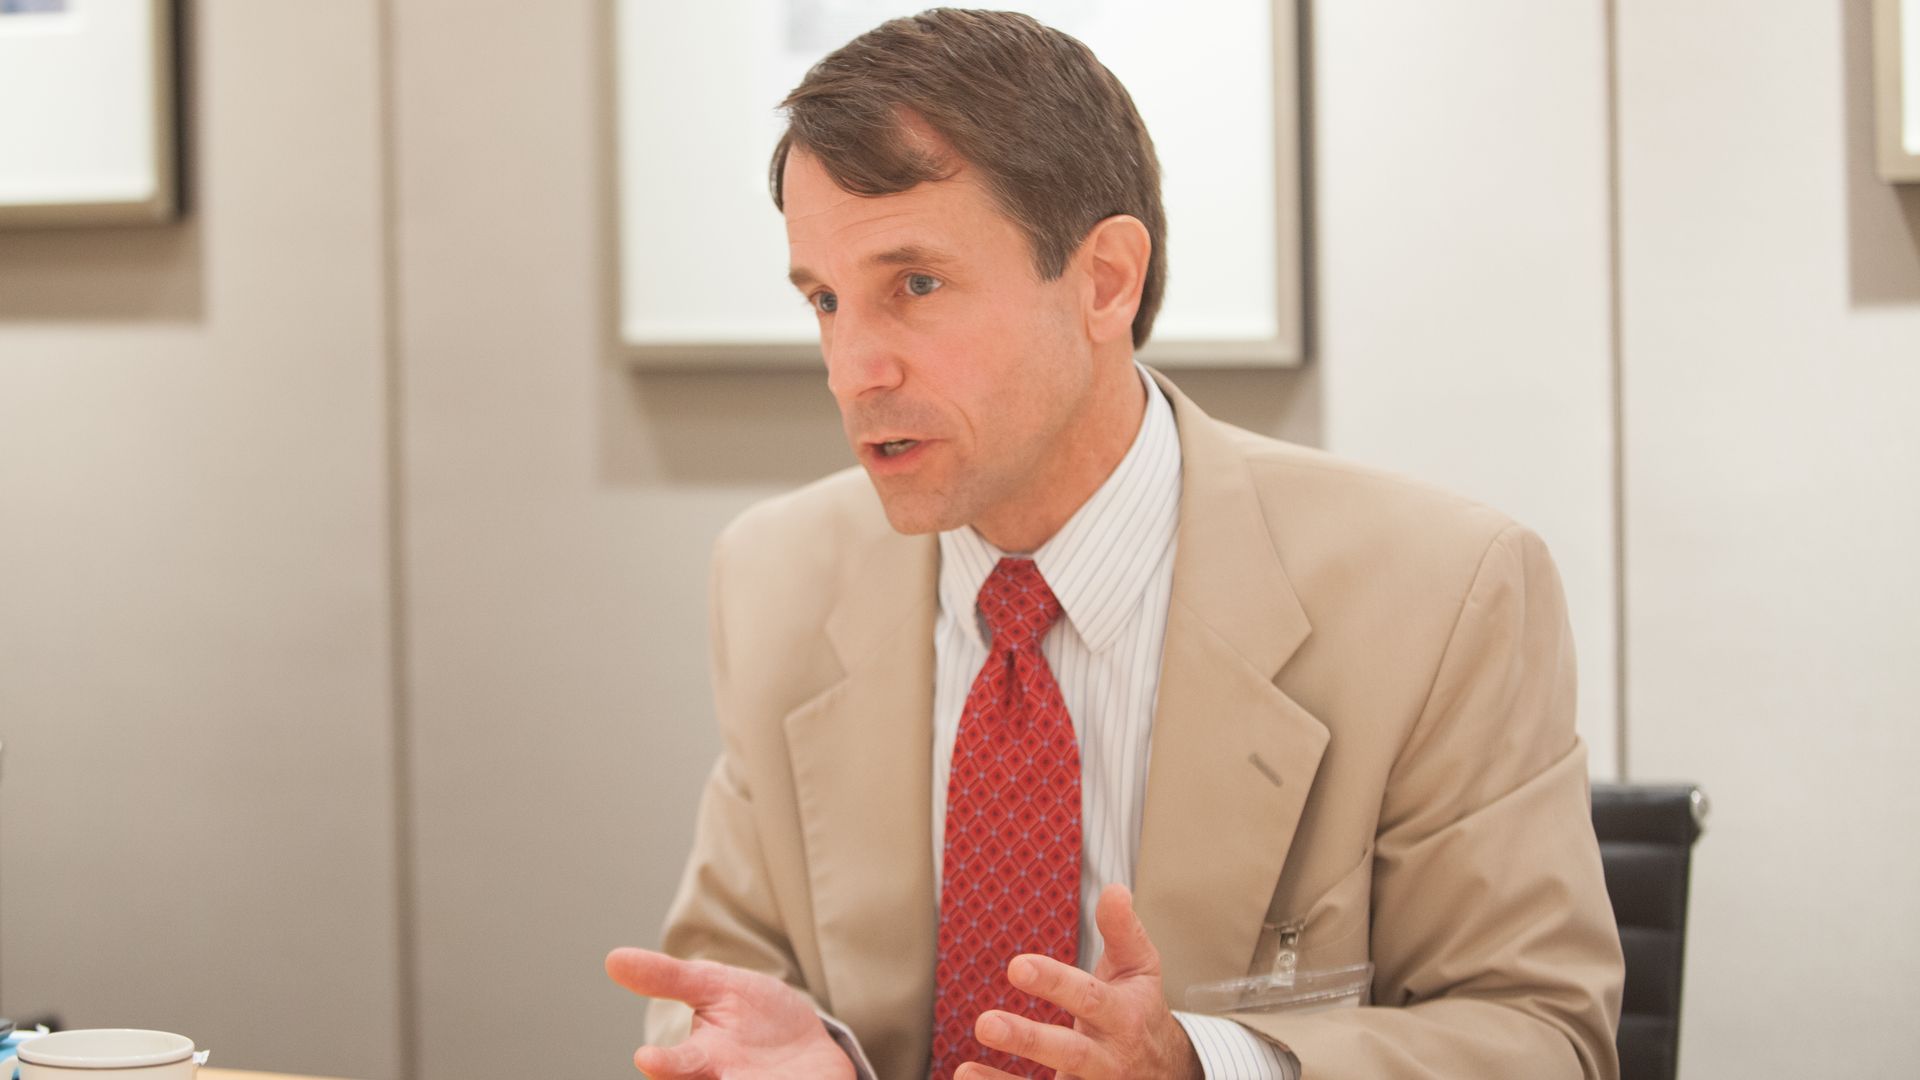 California insurance commissioner Dave Jones in an interview with LA Times